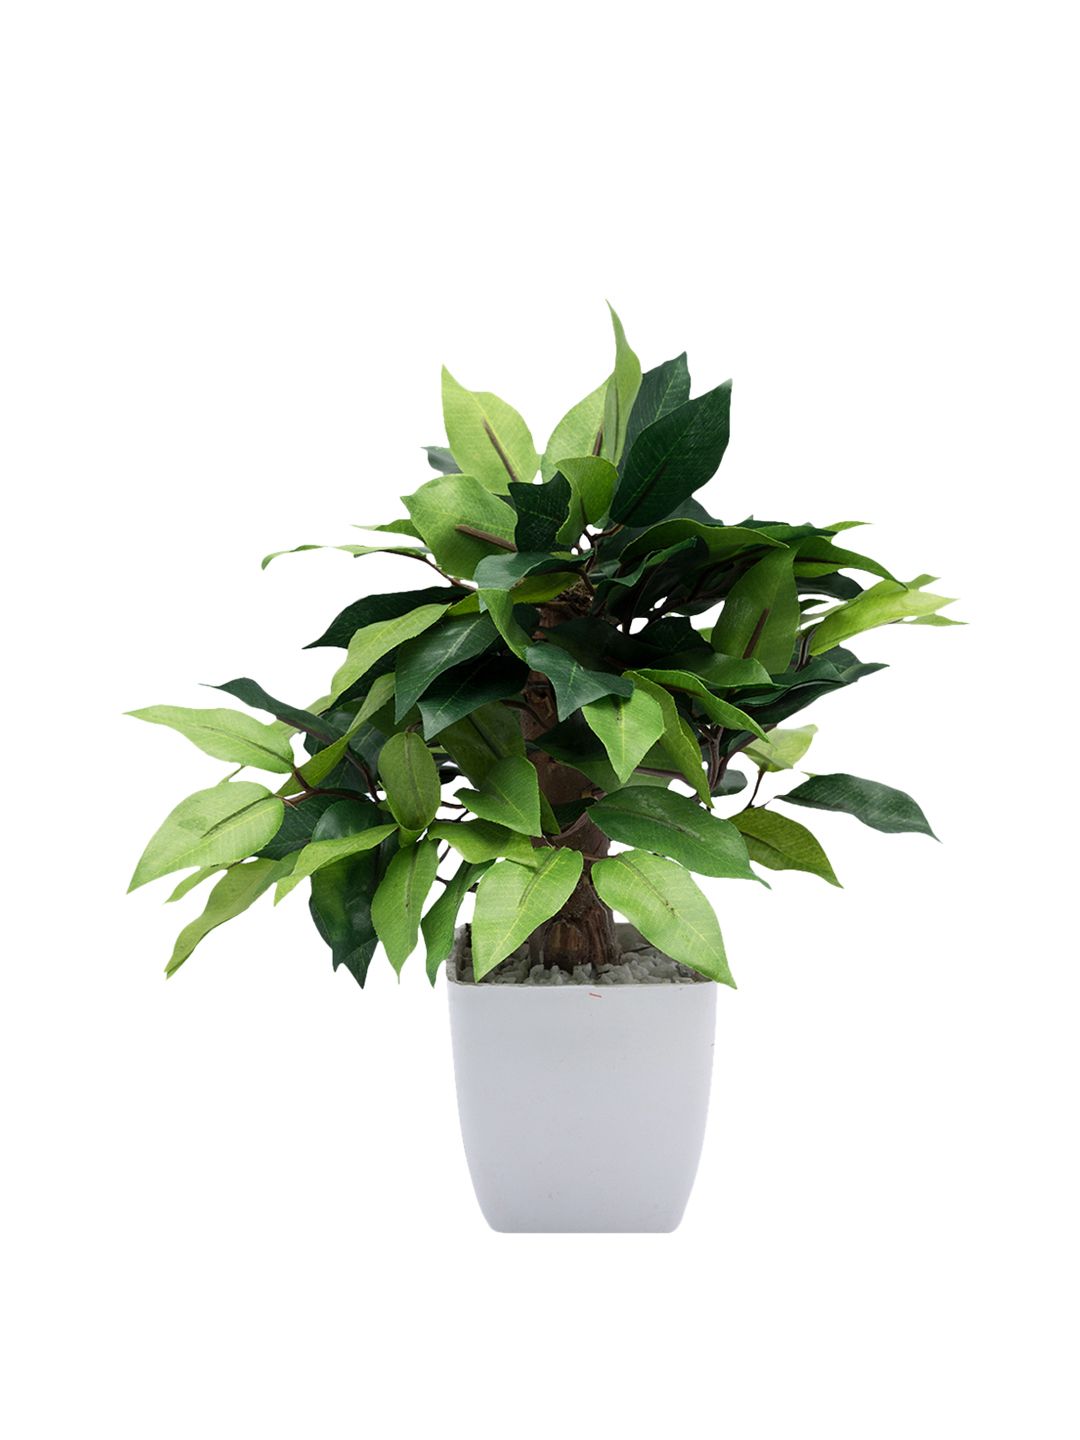 MARKET99 Green Bonsai Artificial Plants With Pot Price in India